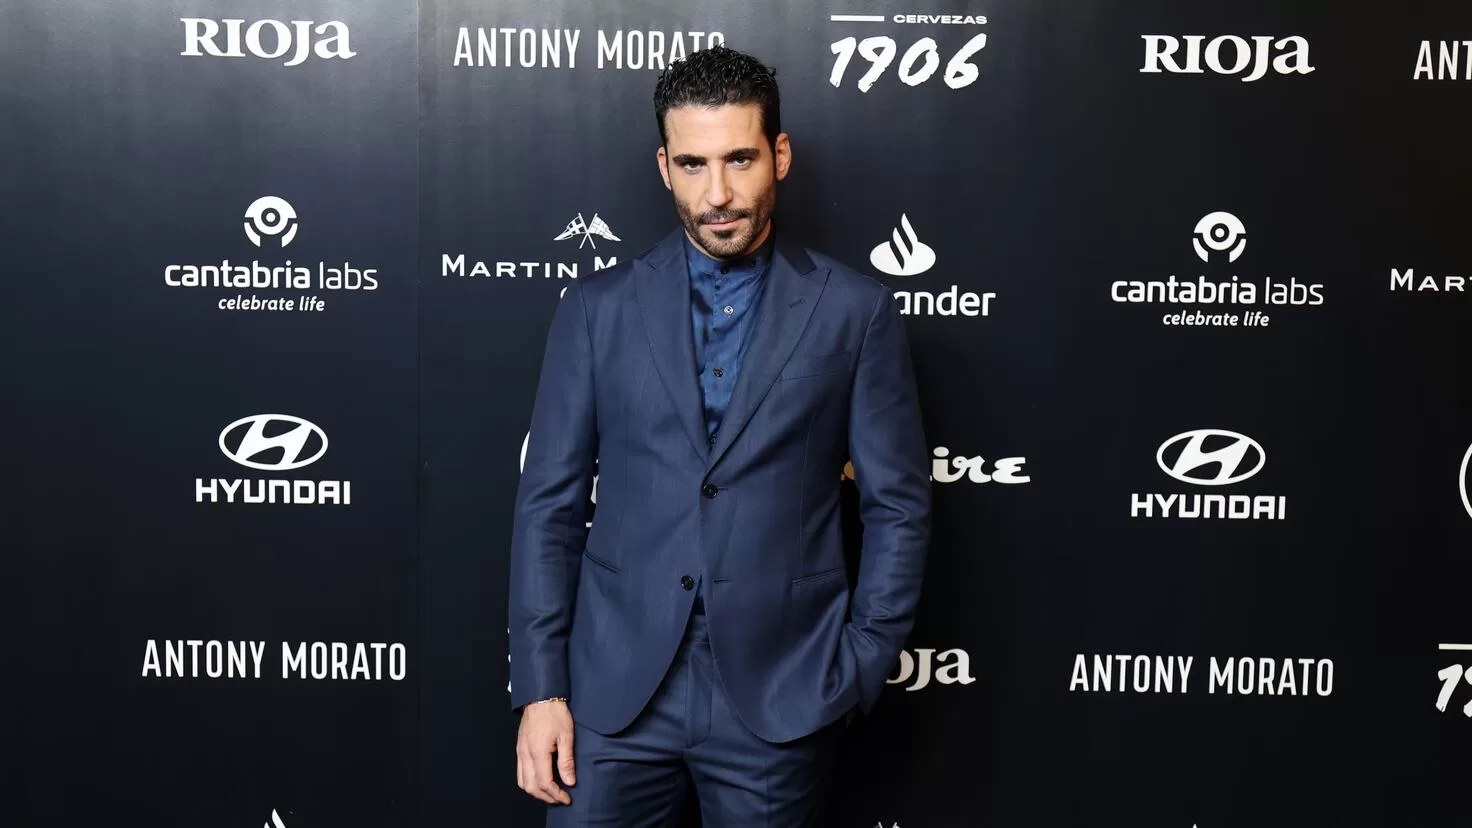 Miguel ngel Silvestre: He never worked for money
